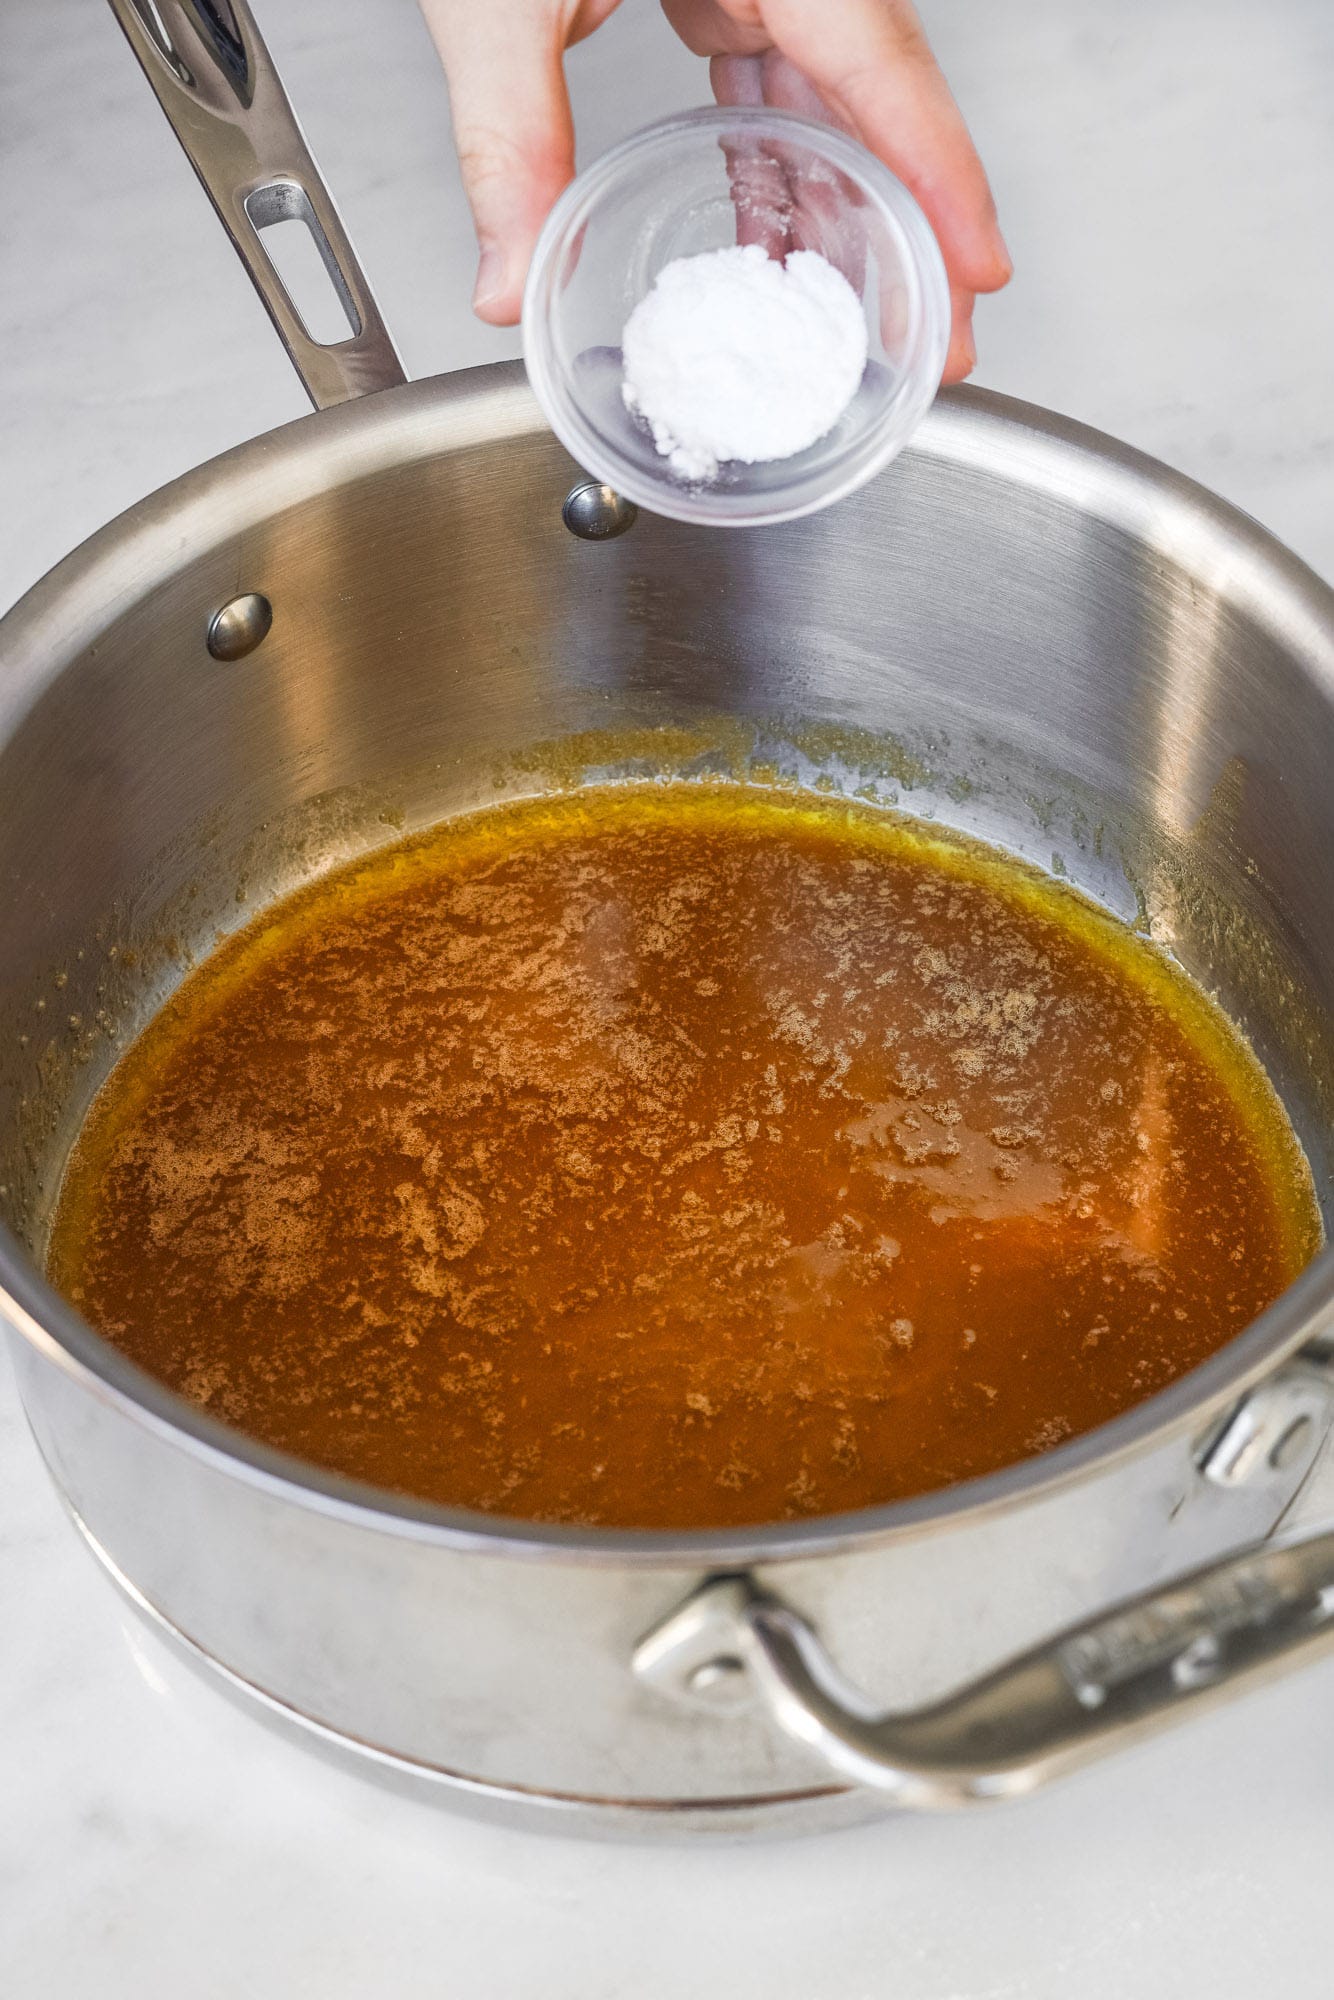 adding baking soda to caramel in a metal saucepan for anzac biscuits.